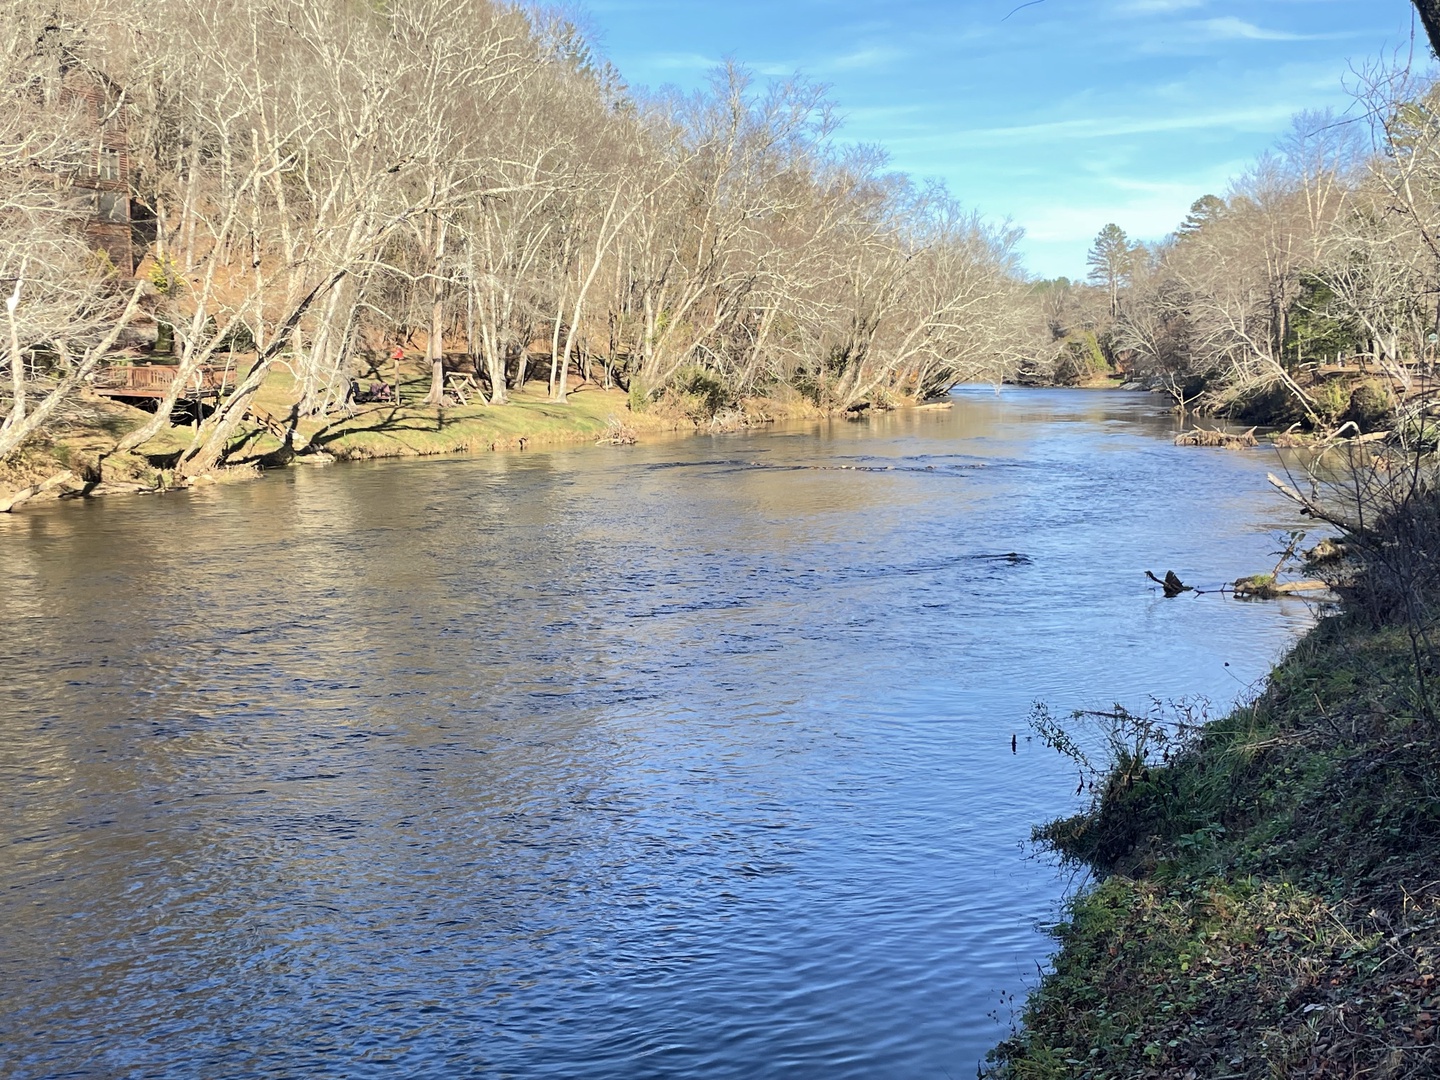 Bears Repeating - Access to Toccoa River